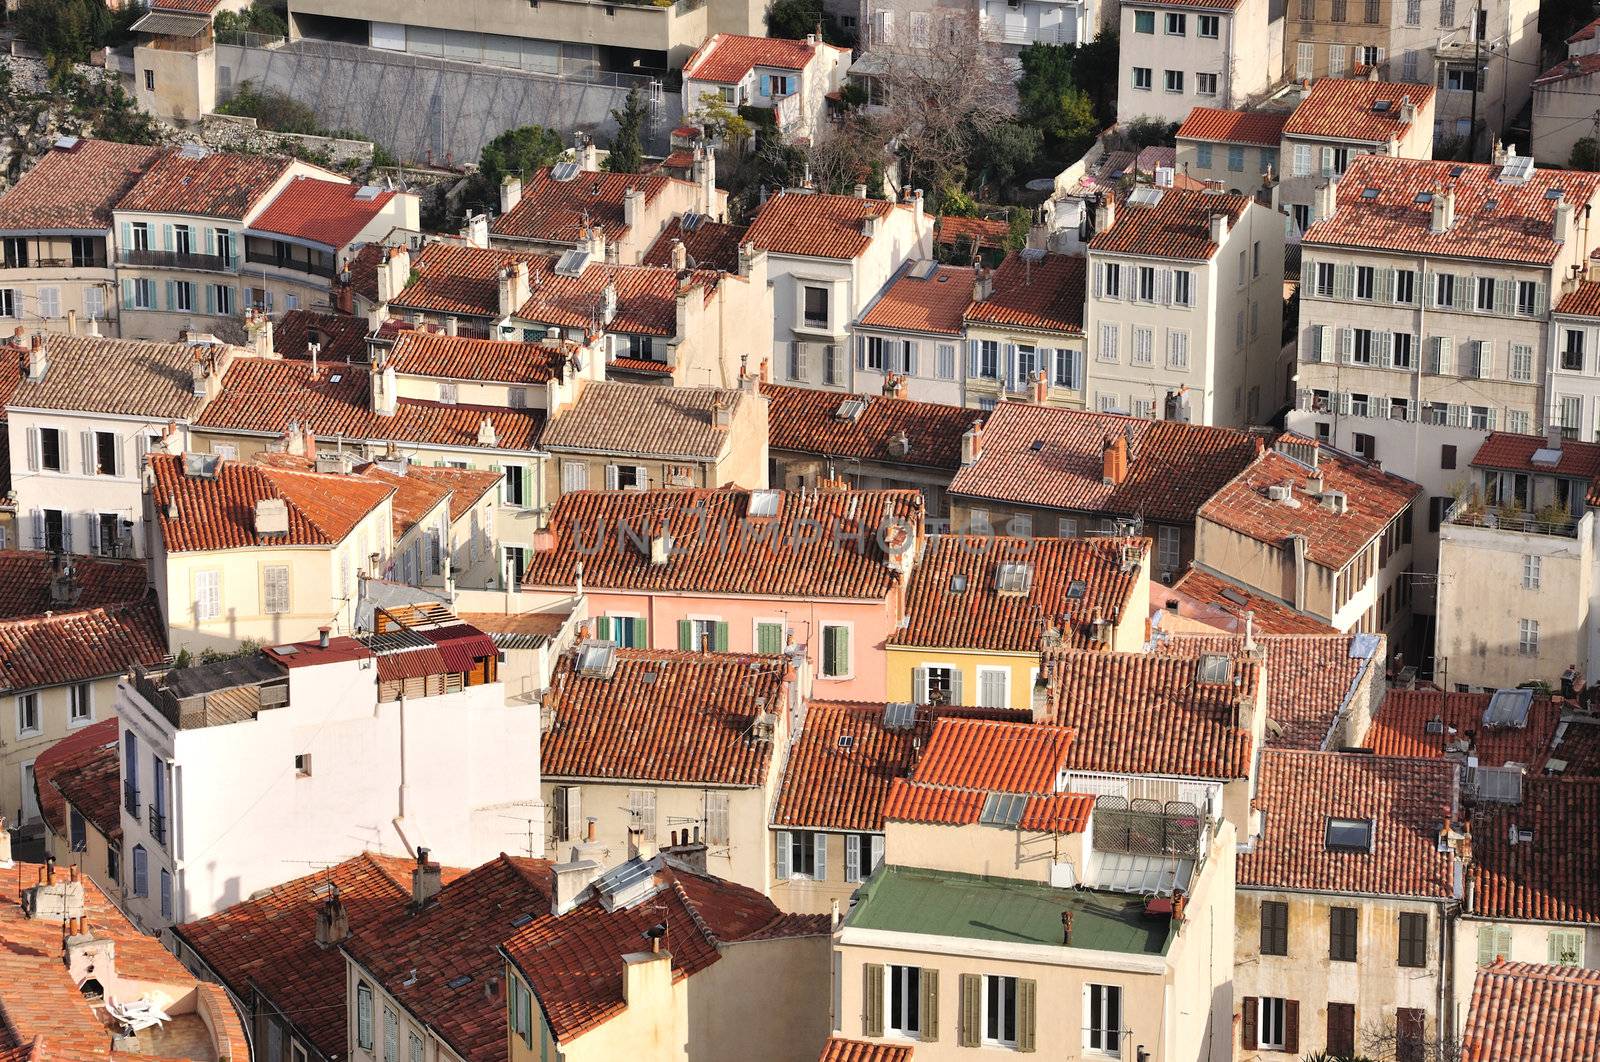 Just common houses which you can easily find in French second largest city - Marseille.